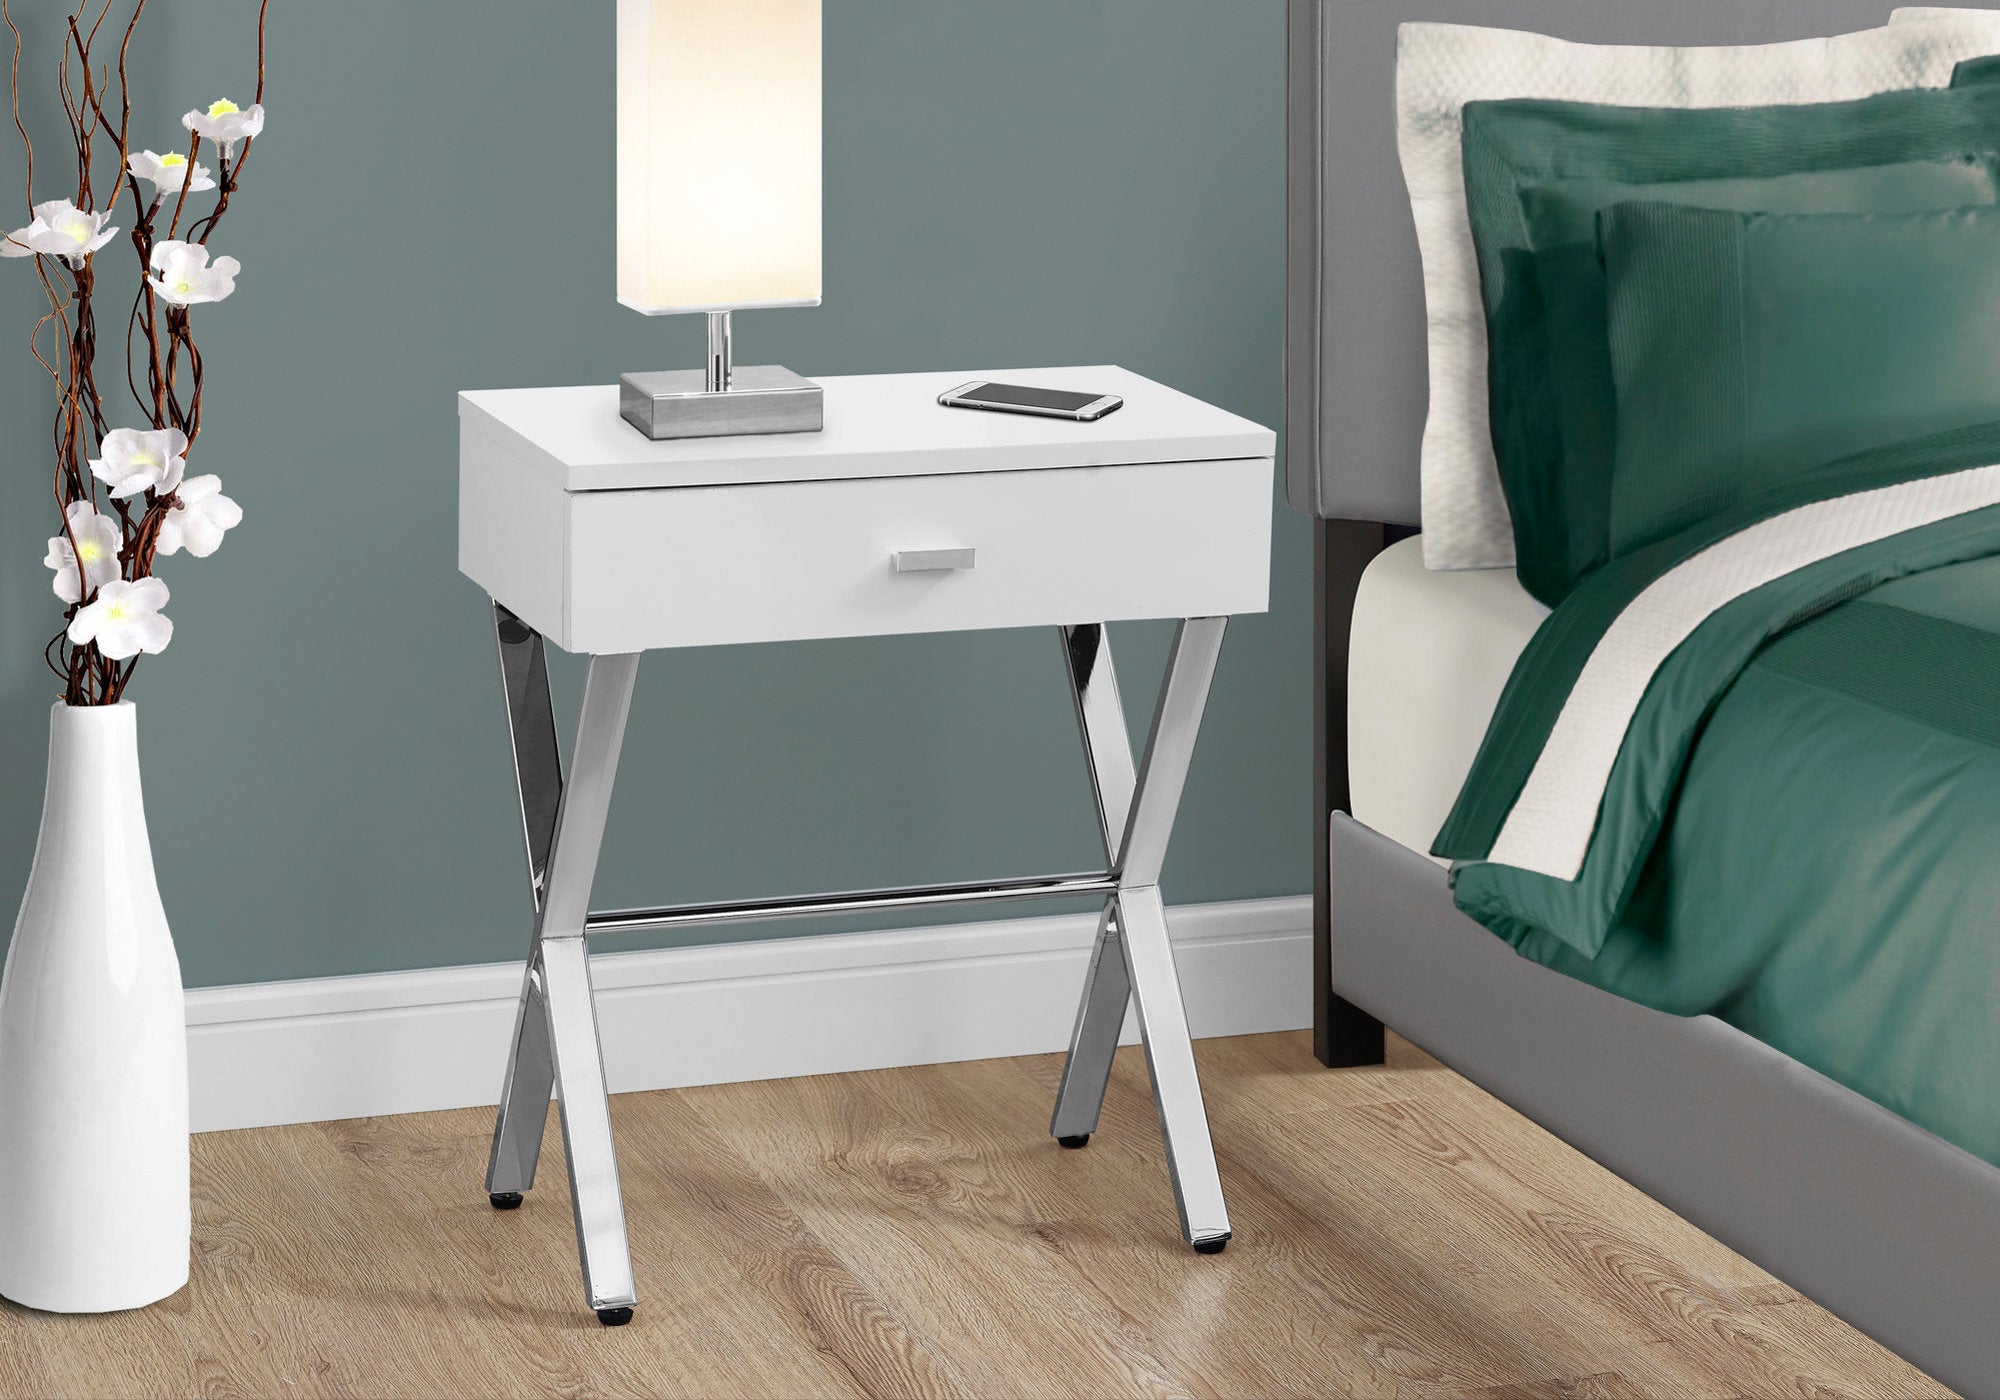 MN-953262    Accent Table, Side, End, Nightstand, Lamp, Living Room, Bedroom, Metal Legs, Laminate, Glossy White, Chrome, Contemporary, Modern